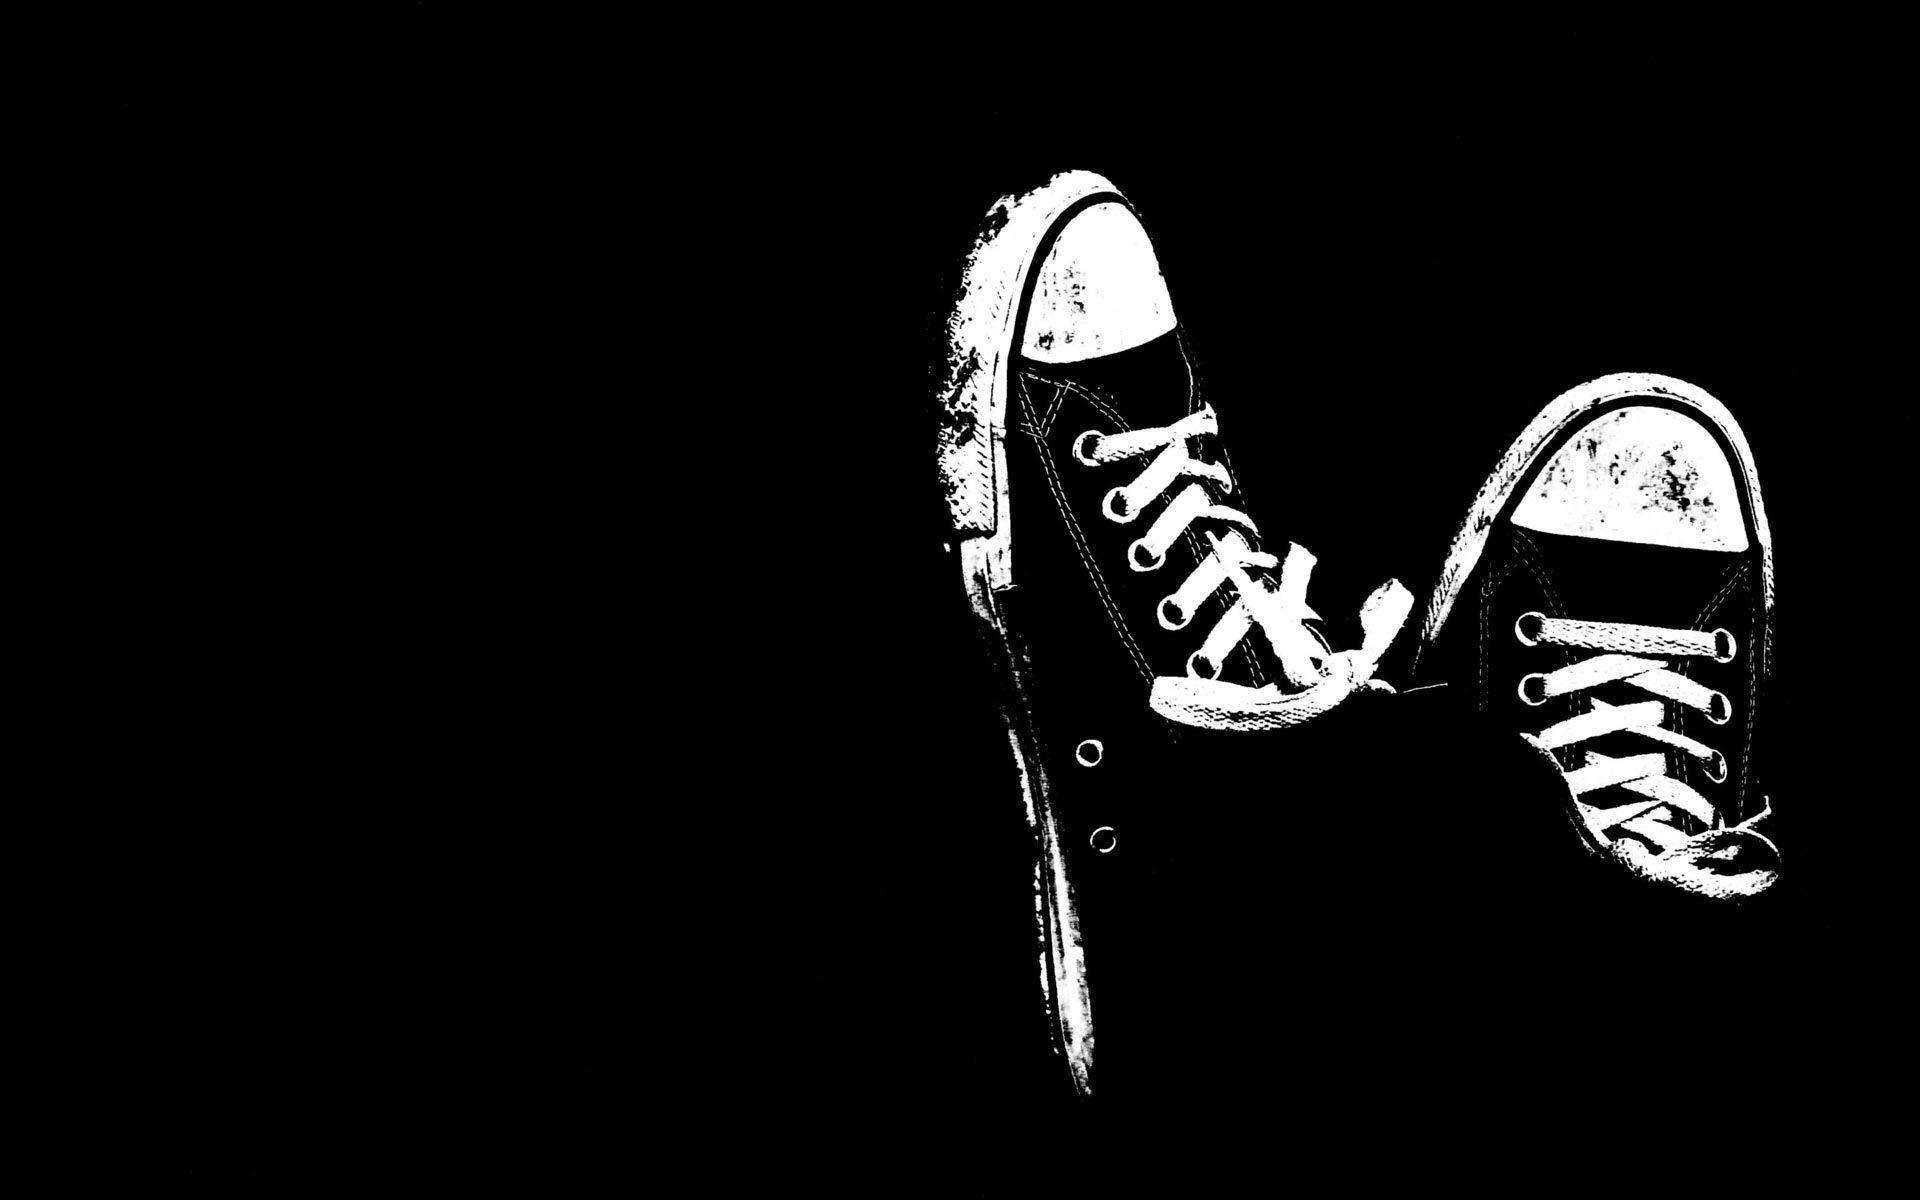 Fonds d&Converse All Star : tous les wallpapers Converse All